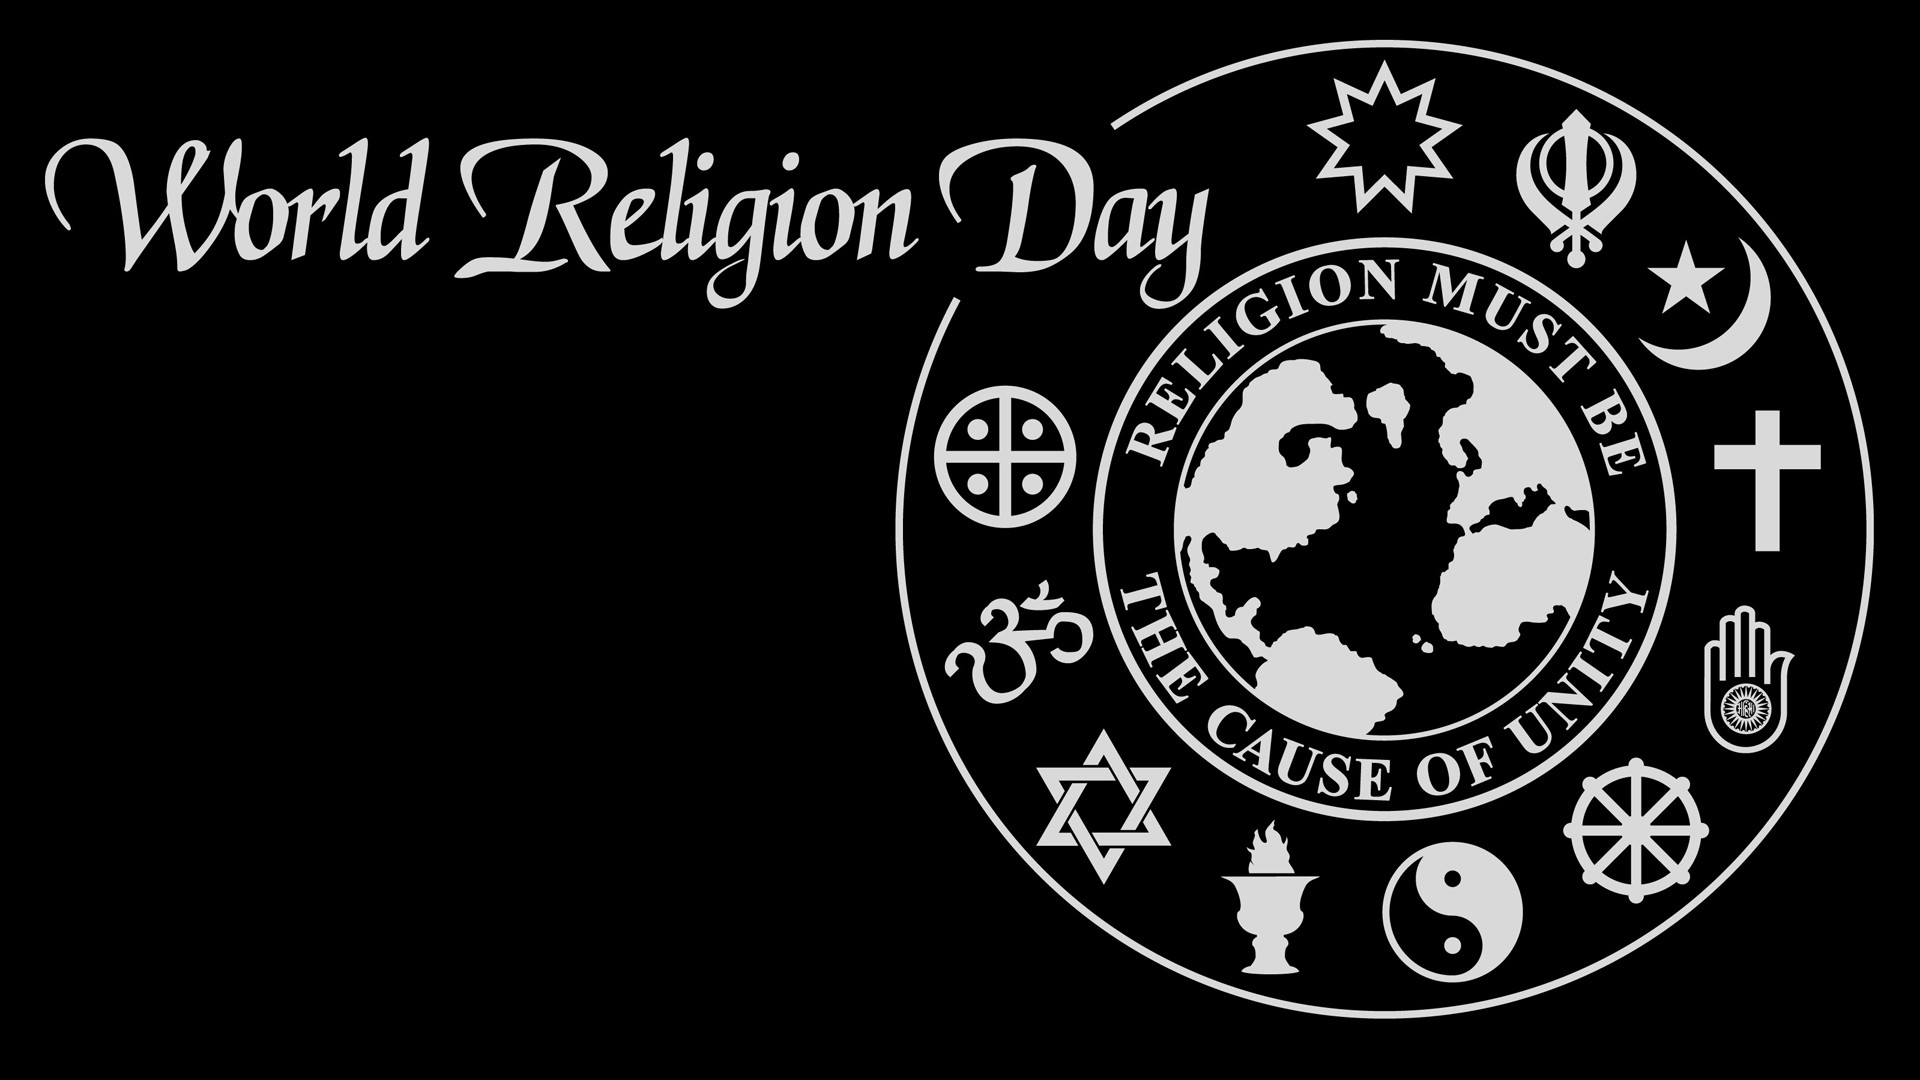 1920x1080 What Is World Religion Day 2017? Holiday Celebrates Spiritual Unity And  Peace Between Faiths